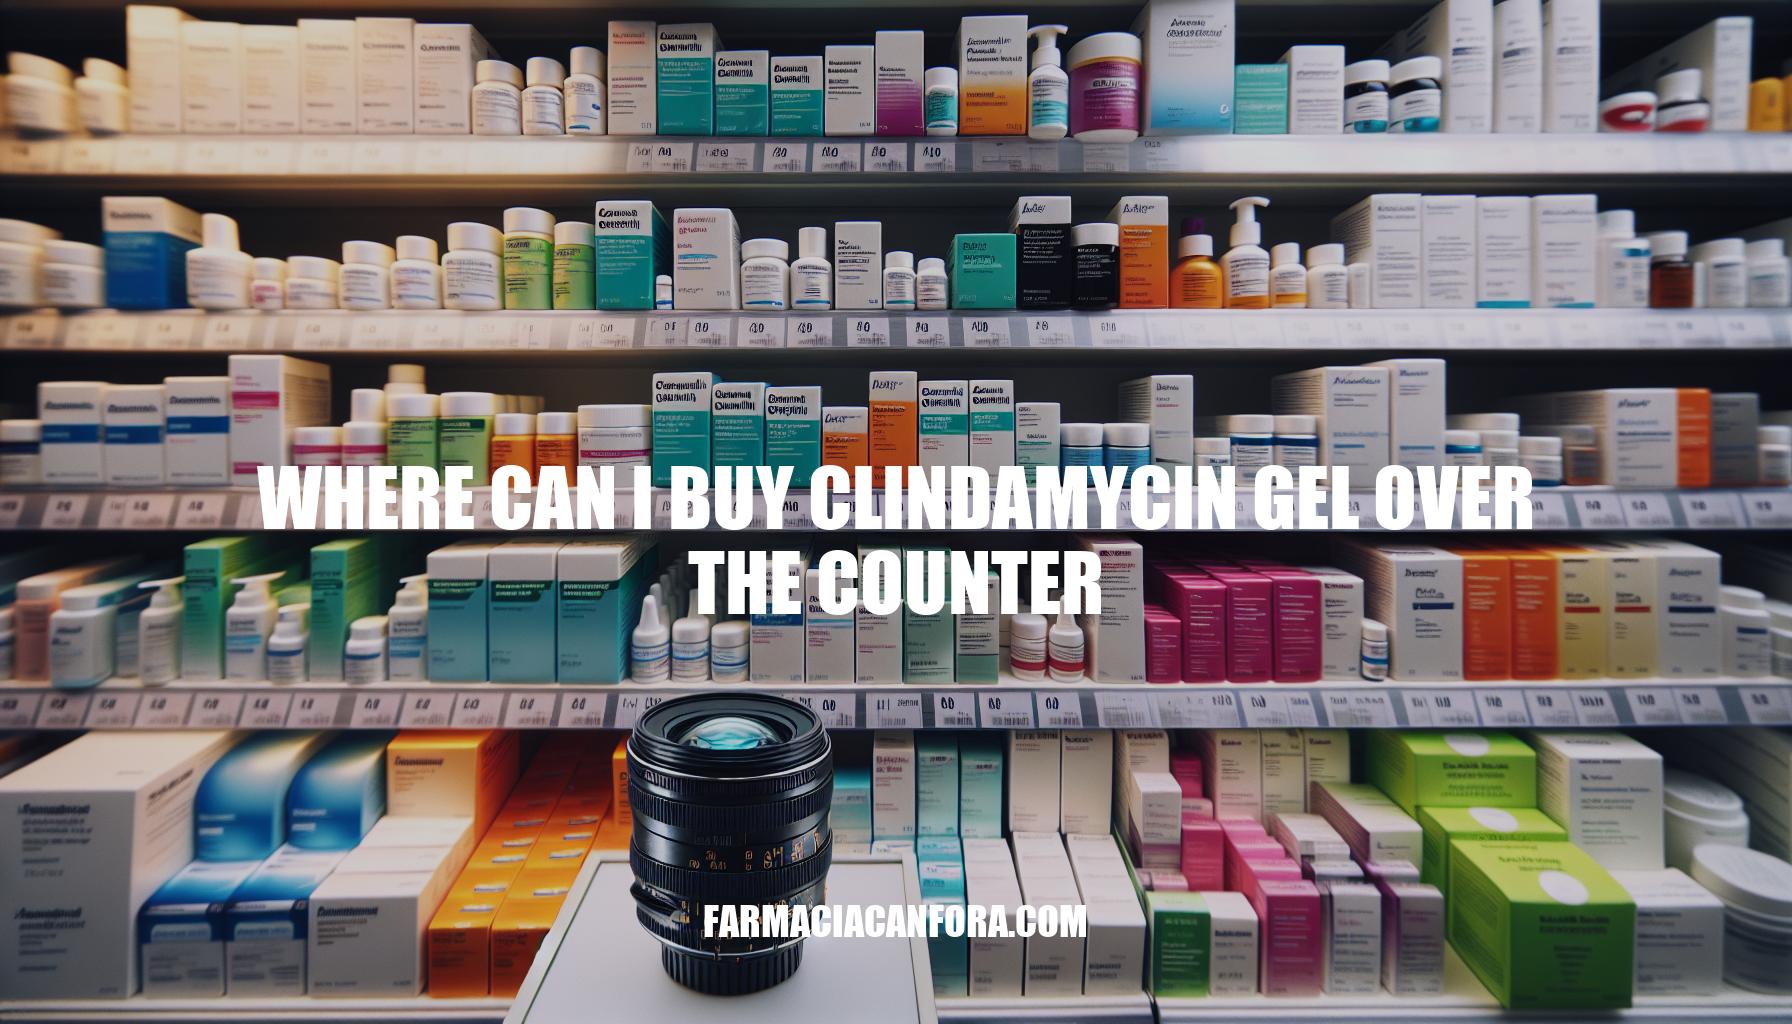 Where to Buy Clindamycin Gel Over the Counter